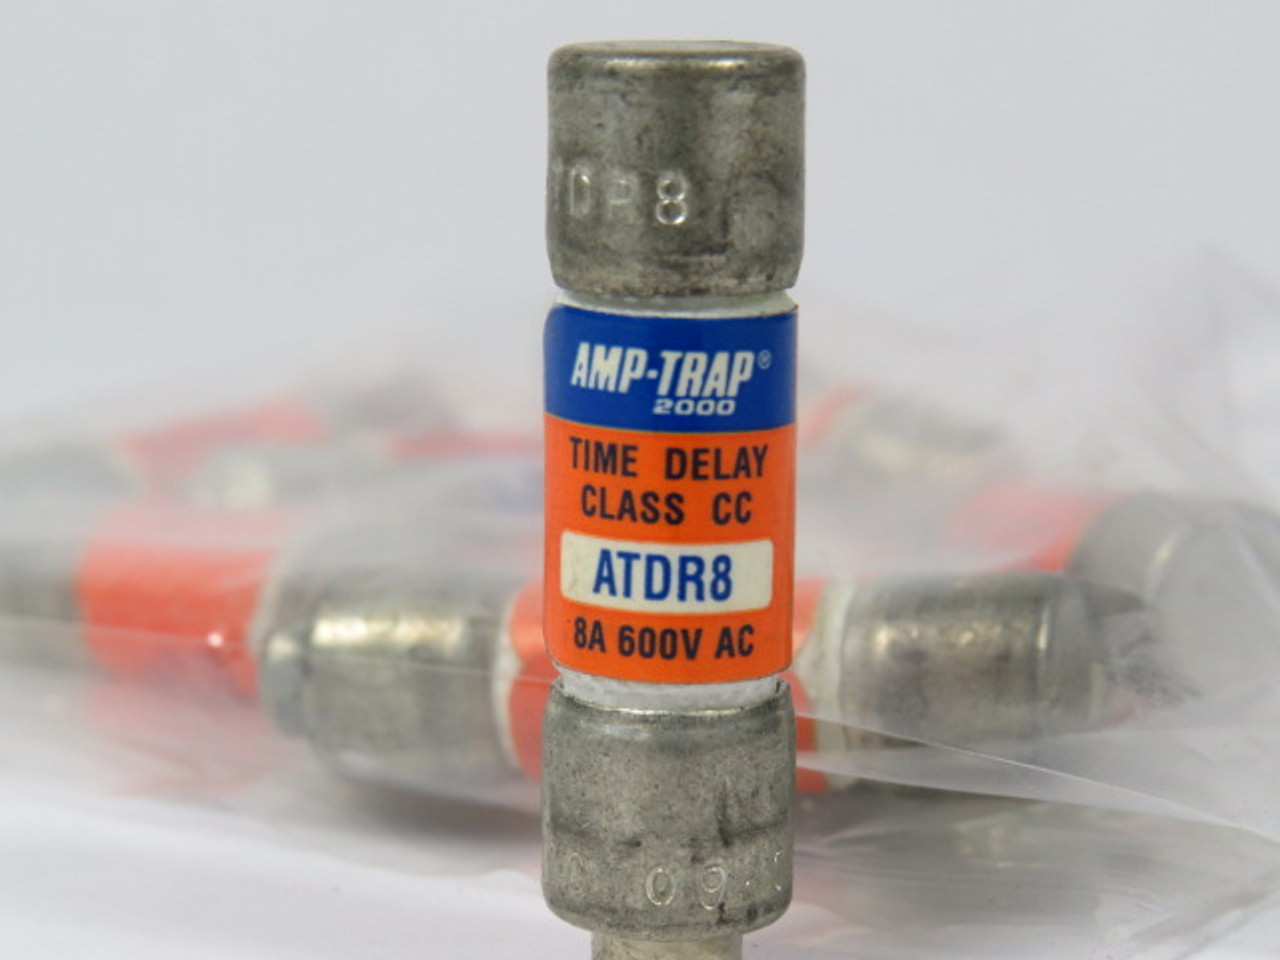 Amp-Trap ATDR8 Time Delay Fuse 8A 600V Lot of 10 USED